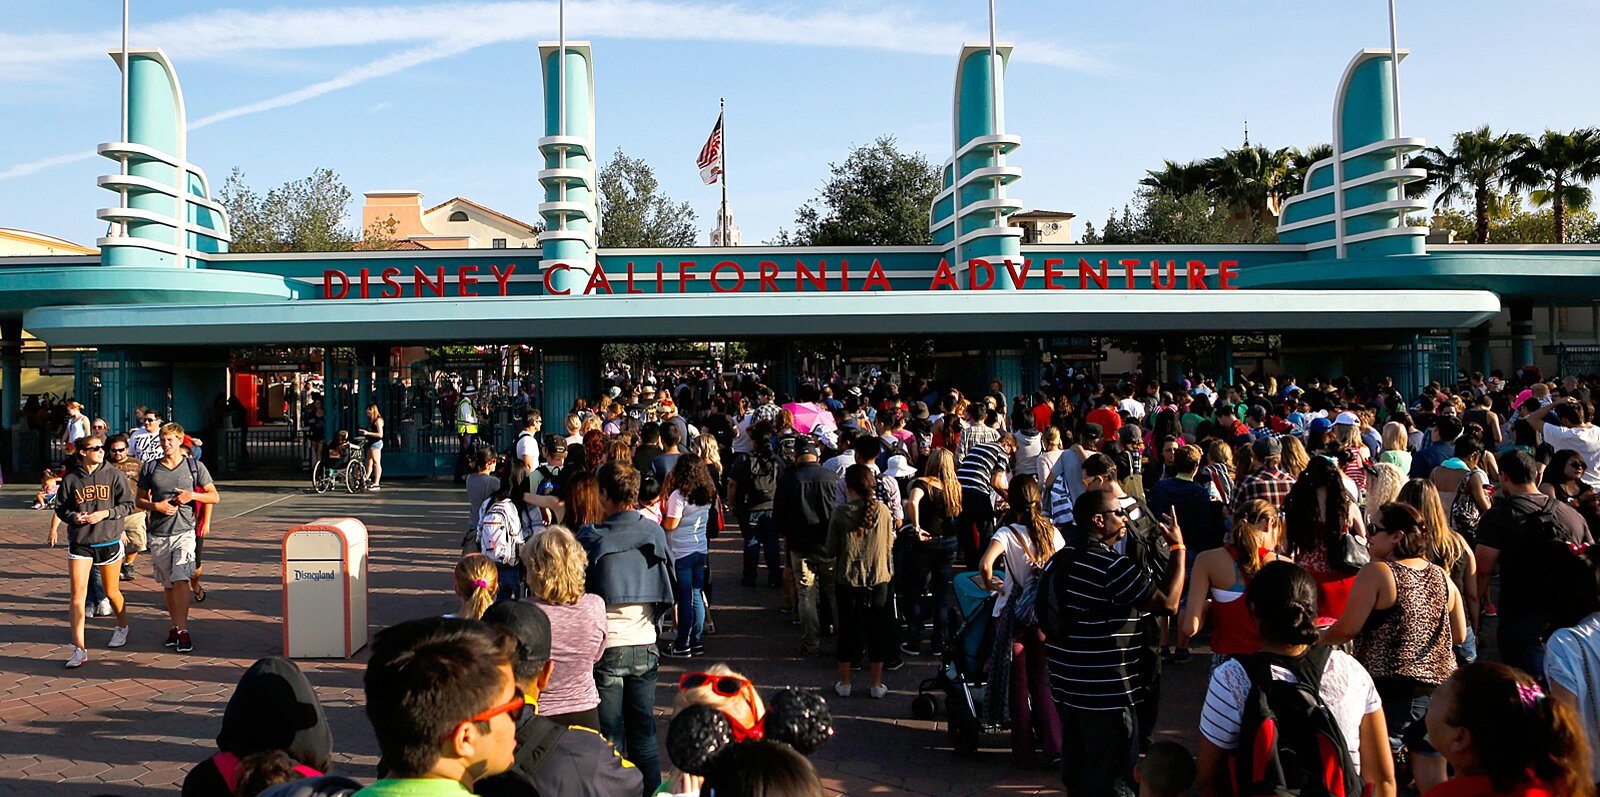 blackout dates for disneyland annual passes are about to